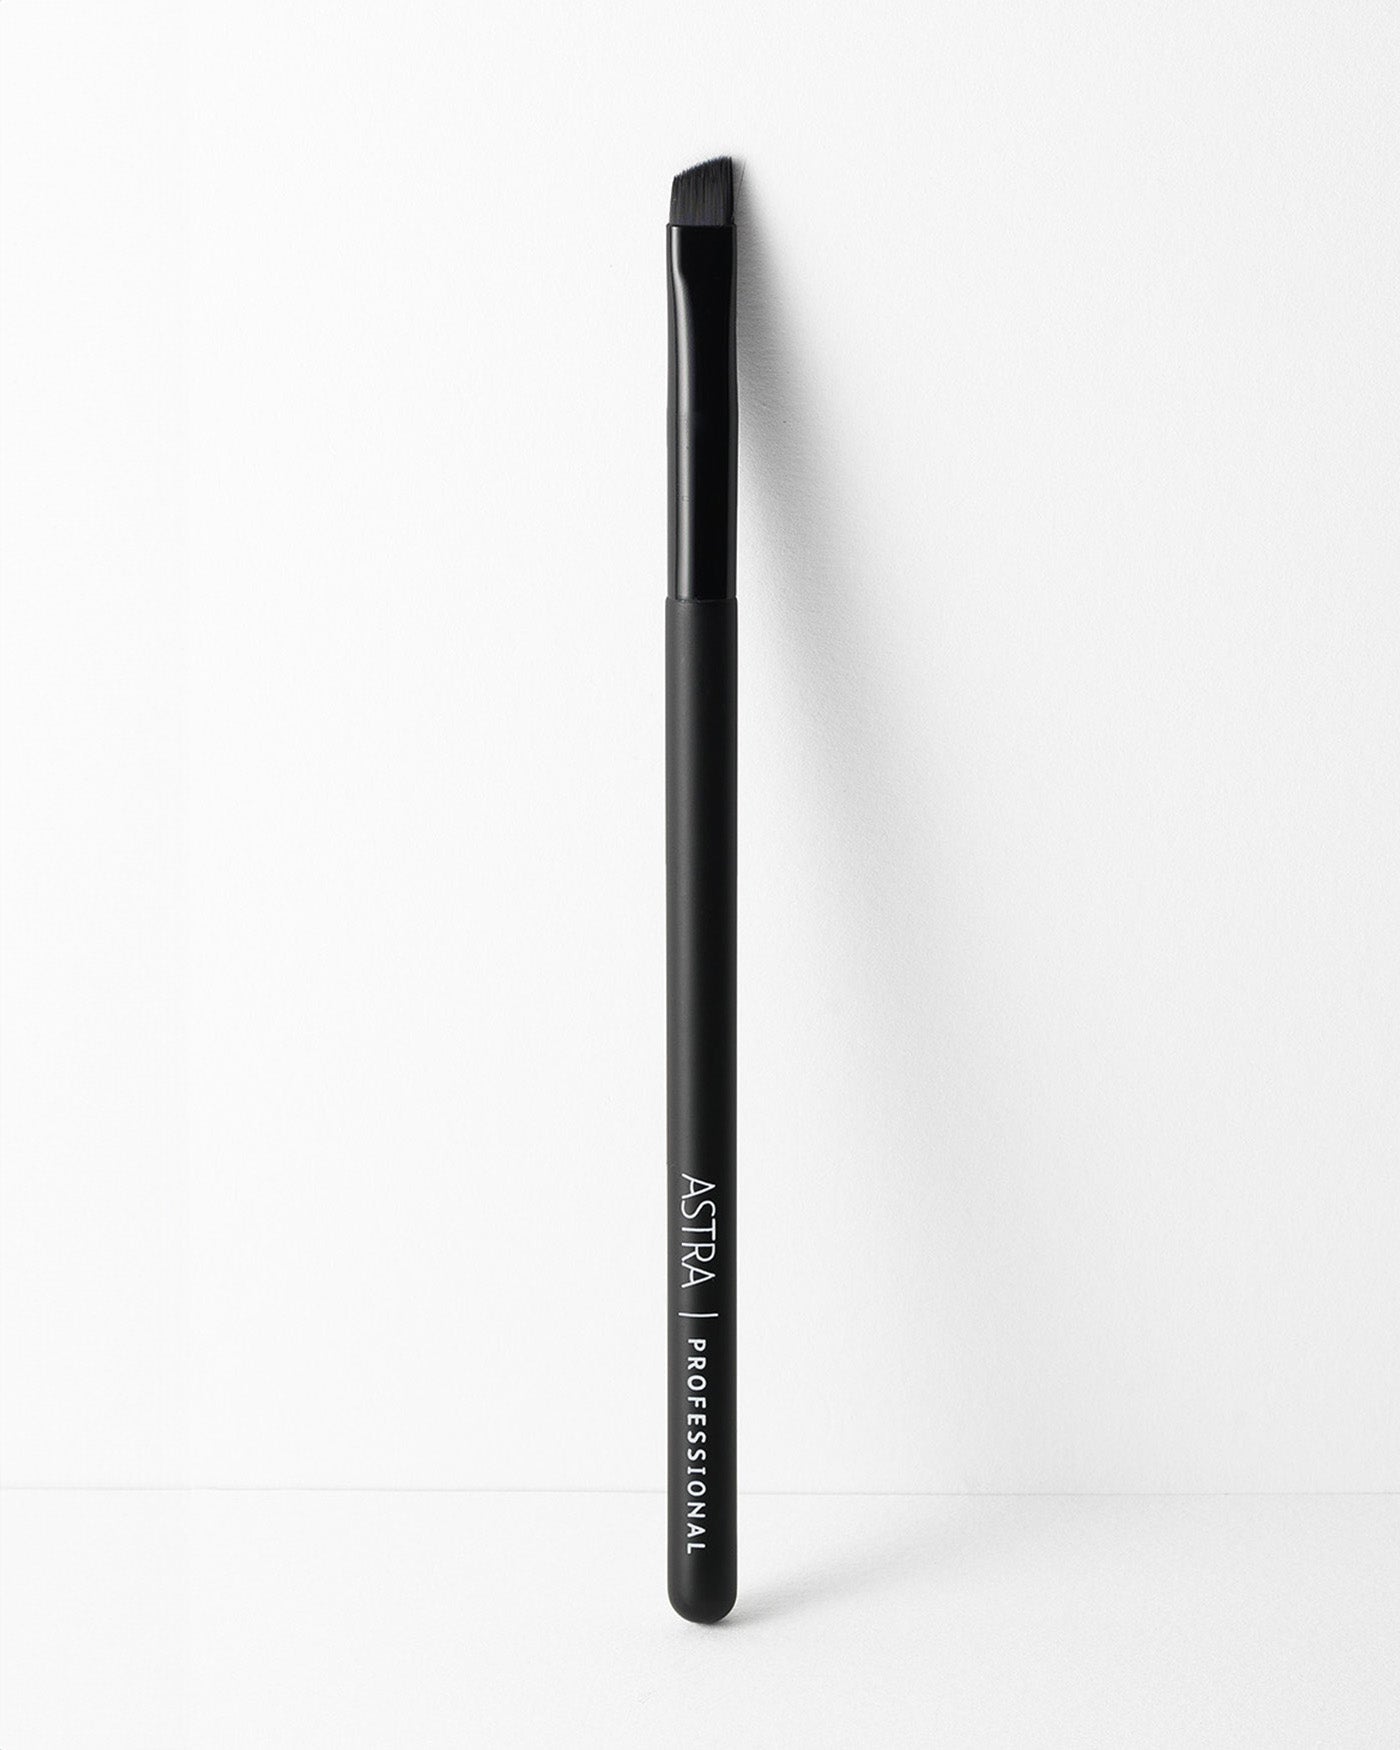 EYELINER BRUSH - Pennello Contorno Occhi Professionale - Pennelli Make-up - Astra Make-Up